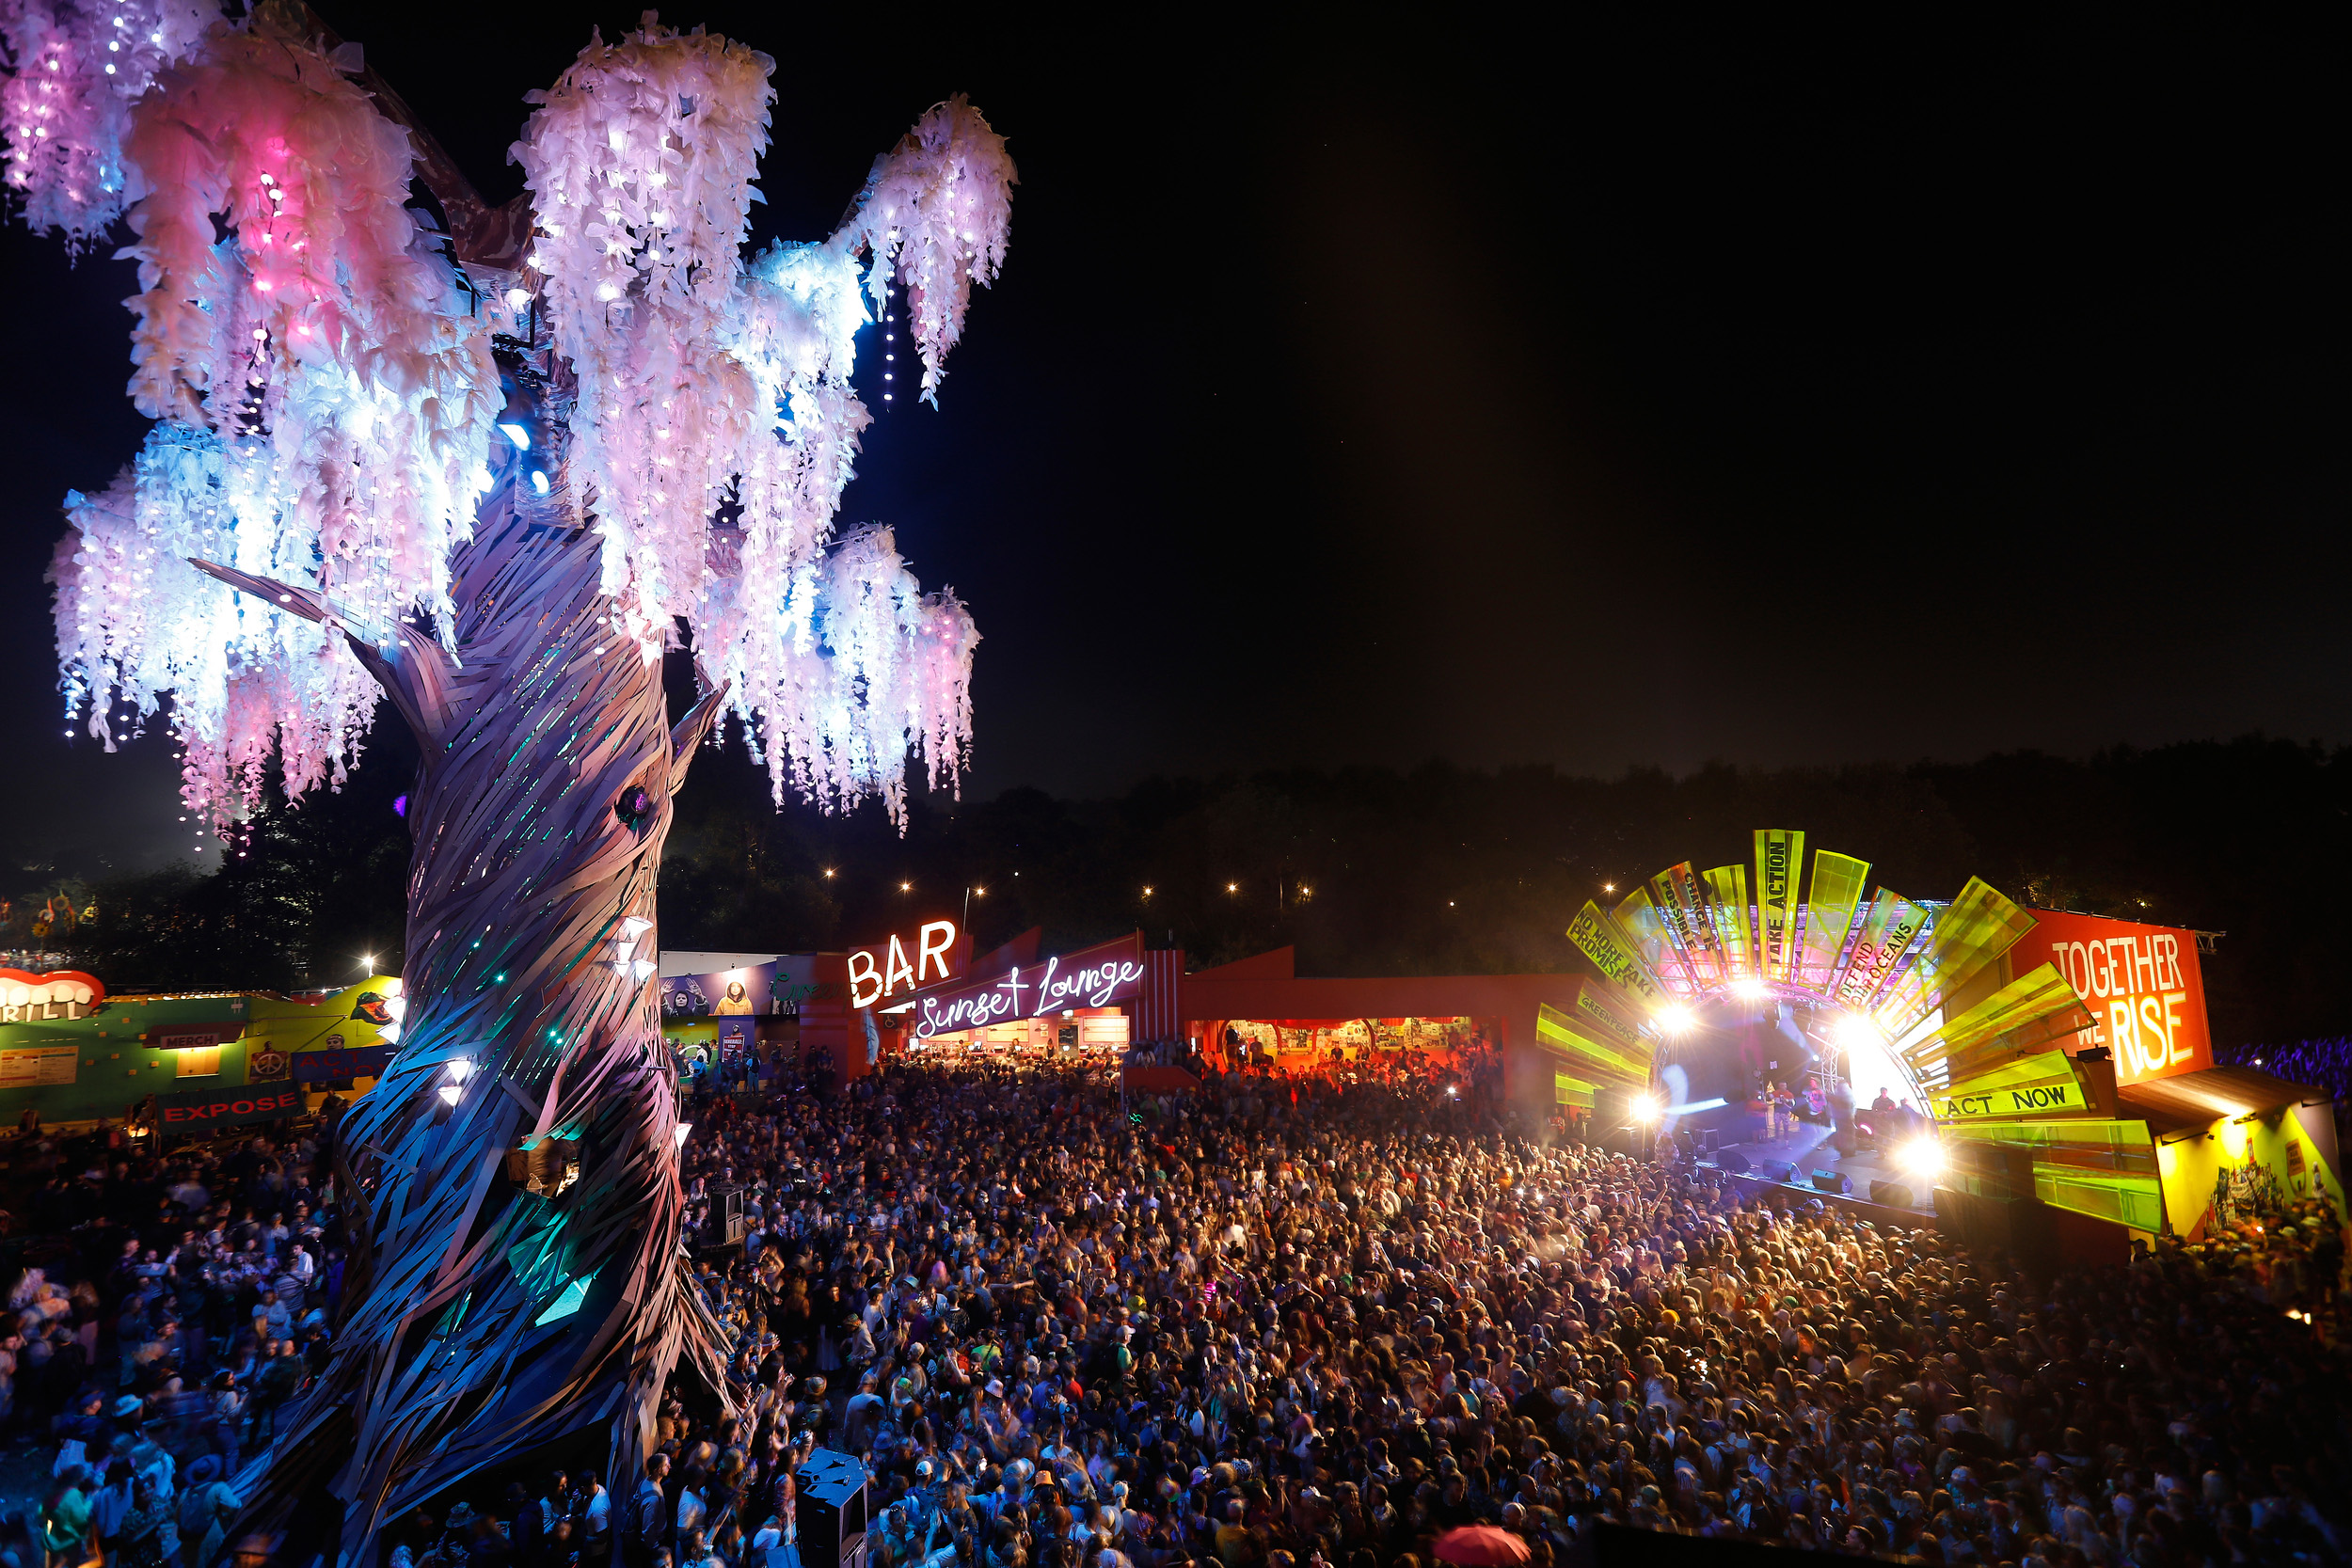 A giant illuminated tree stands proud above a large crowd who are watching live music on a stage at night.